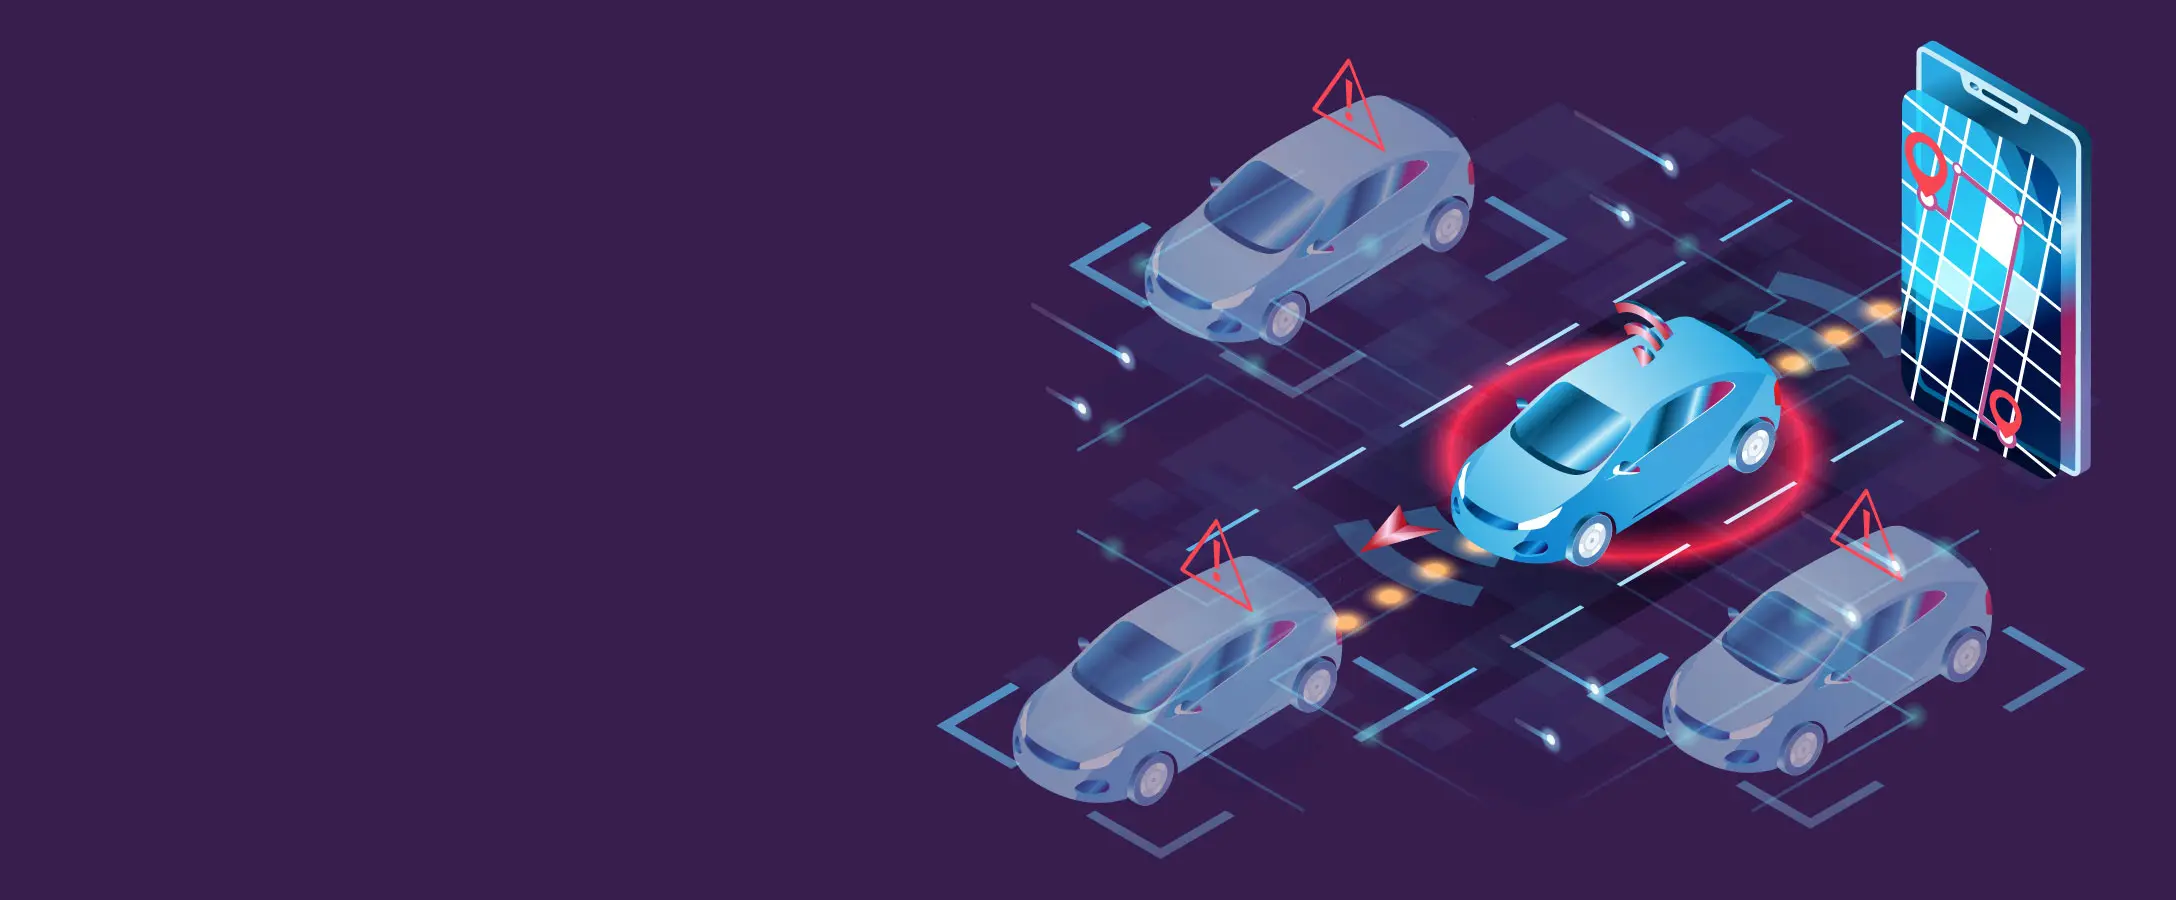 Autonomous vehicles driving on a purple background with mobile phone indicating location.  